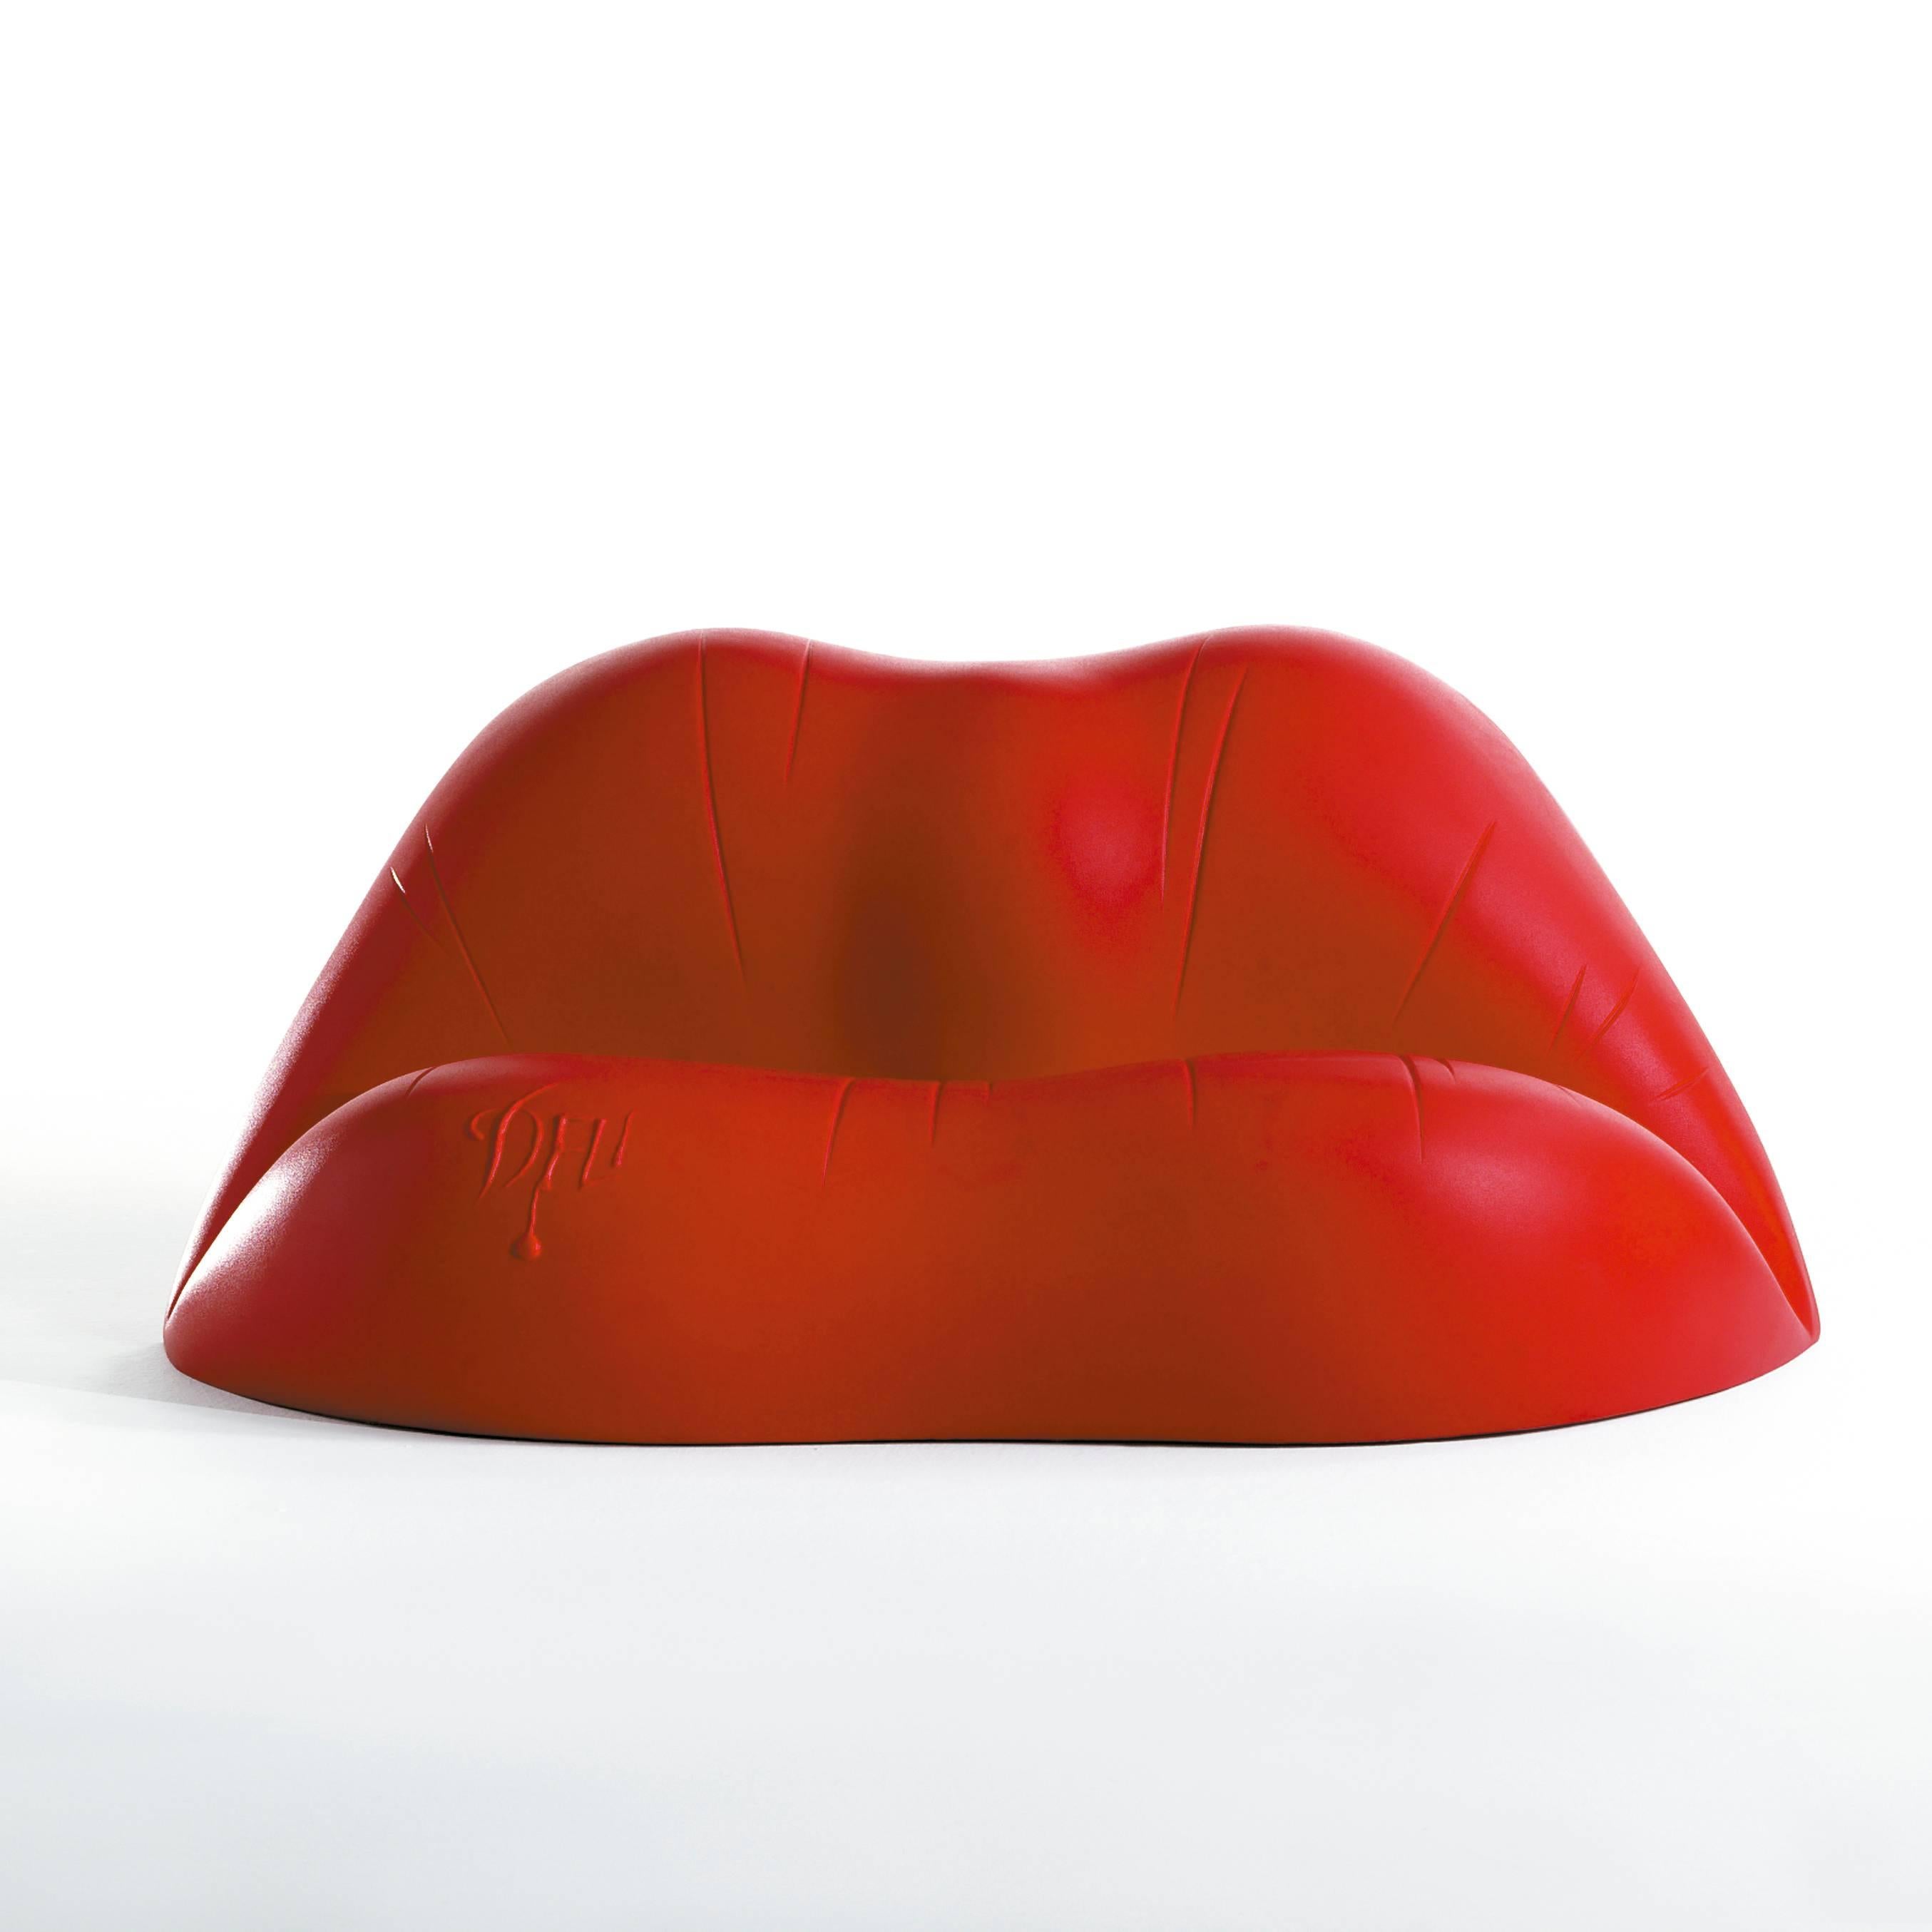 Dalilips designed by Salvador Dali for BD design.

Two-seat sofa made of polyethylene with rotational moulding process. Color red.

Measures: 100 x 170 x 73 H cm.

Is the famous sofa in the shape of a mouth which the artist created together